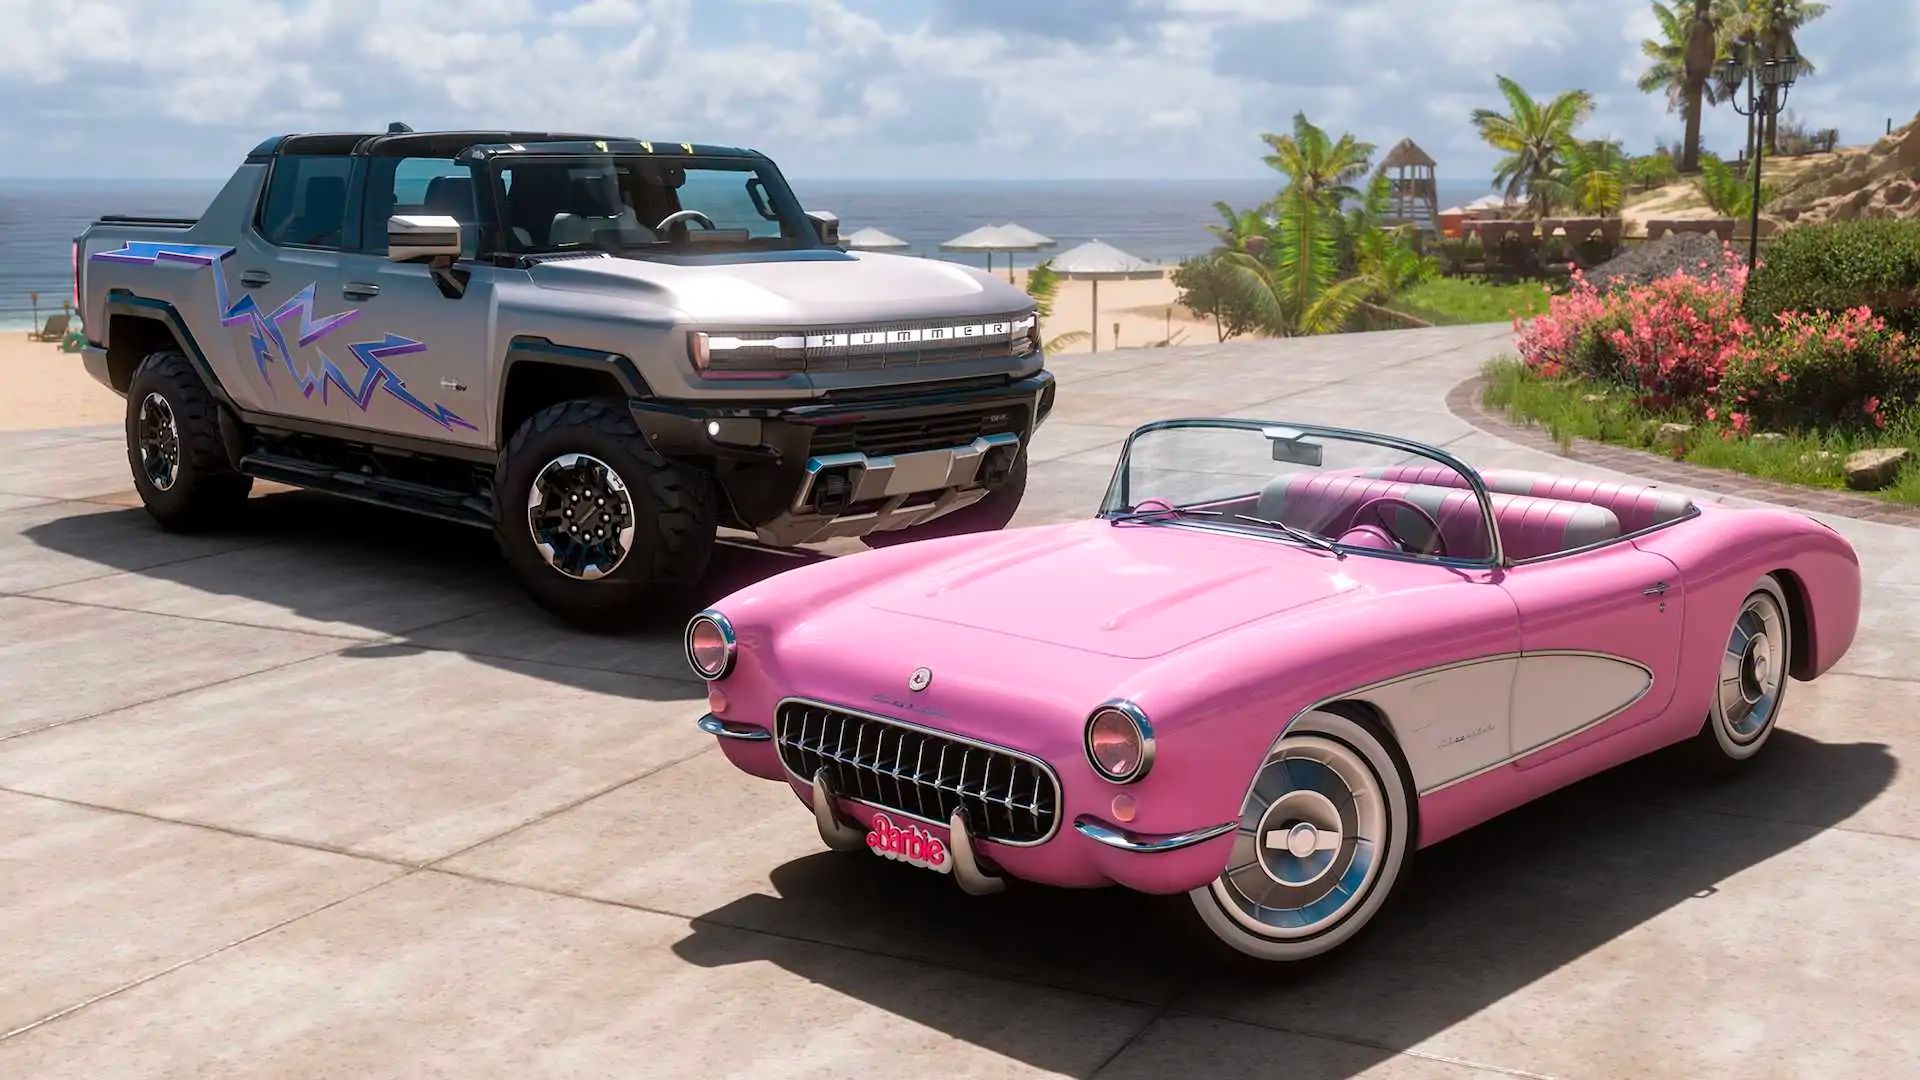 The latest Forza Horizon 5 DLC features cars from the Barbie movie